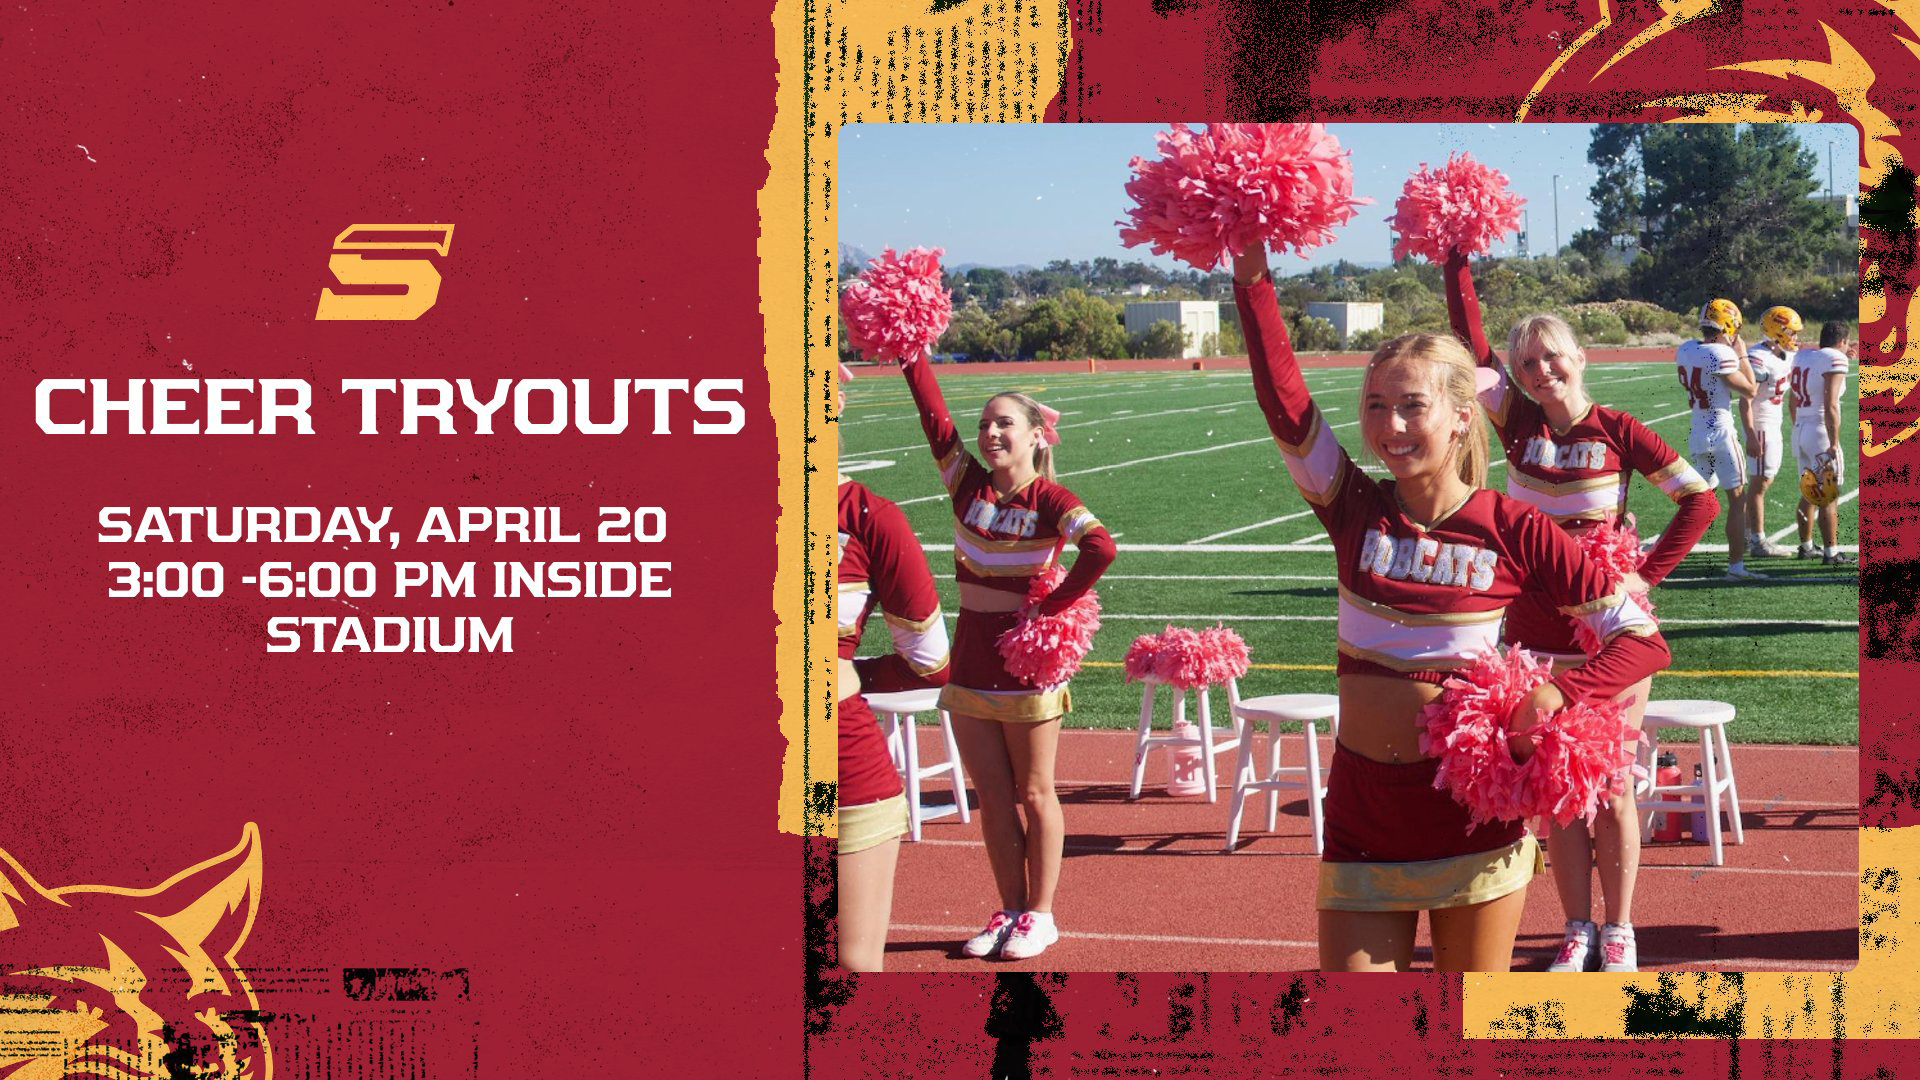 Cheer tryouts on April 20